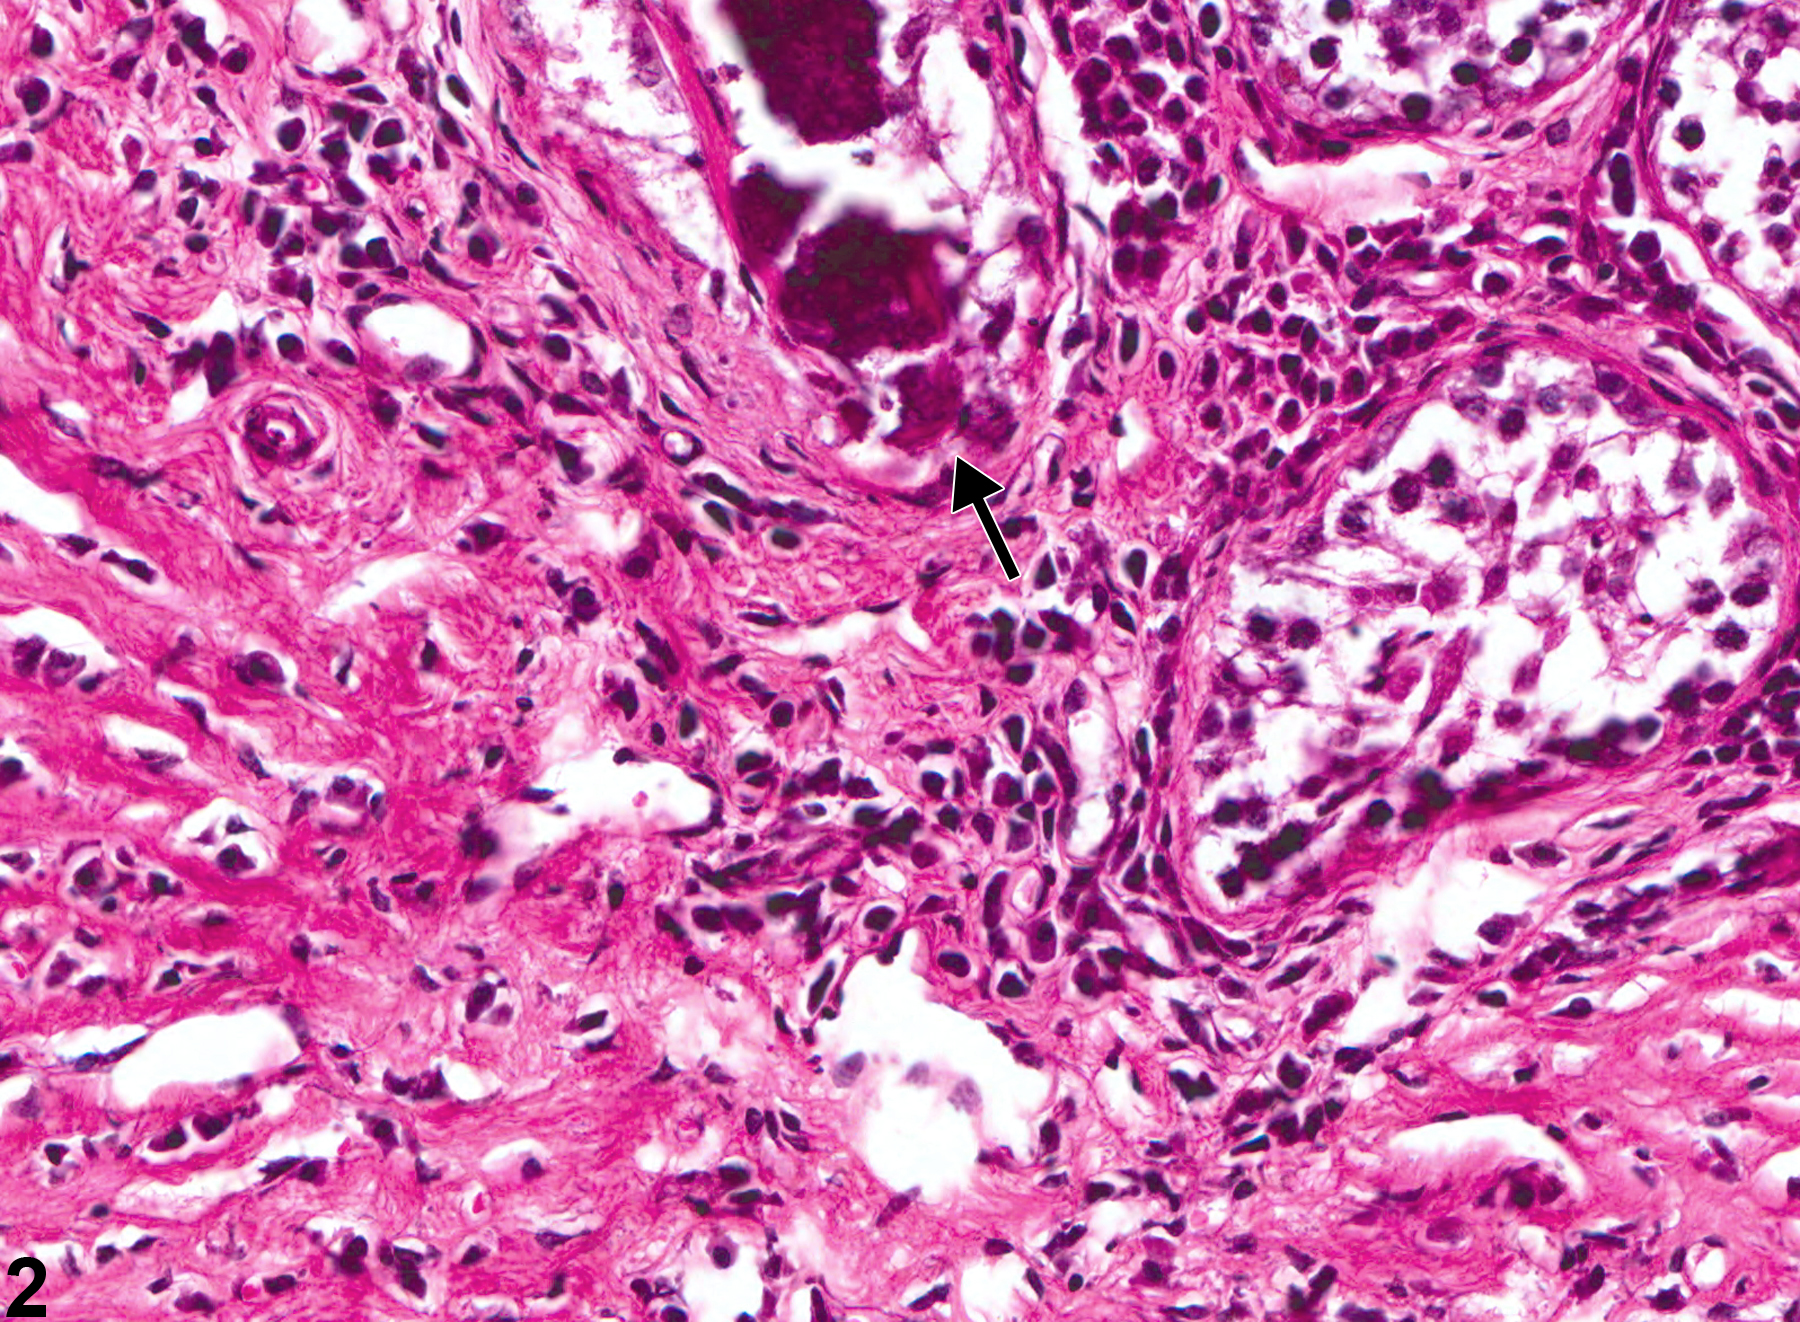 Image of fibrosis in the testis from a male Swiss CD-1 mouse in a chronic study